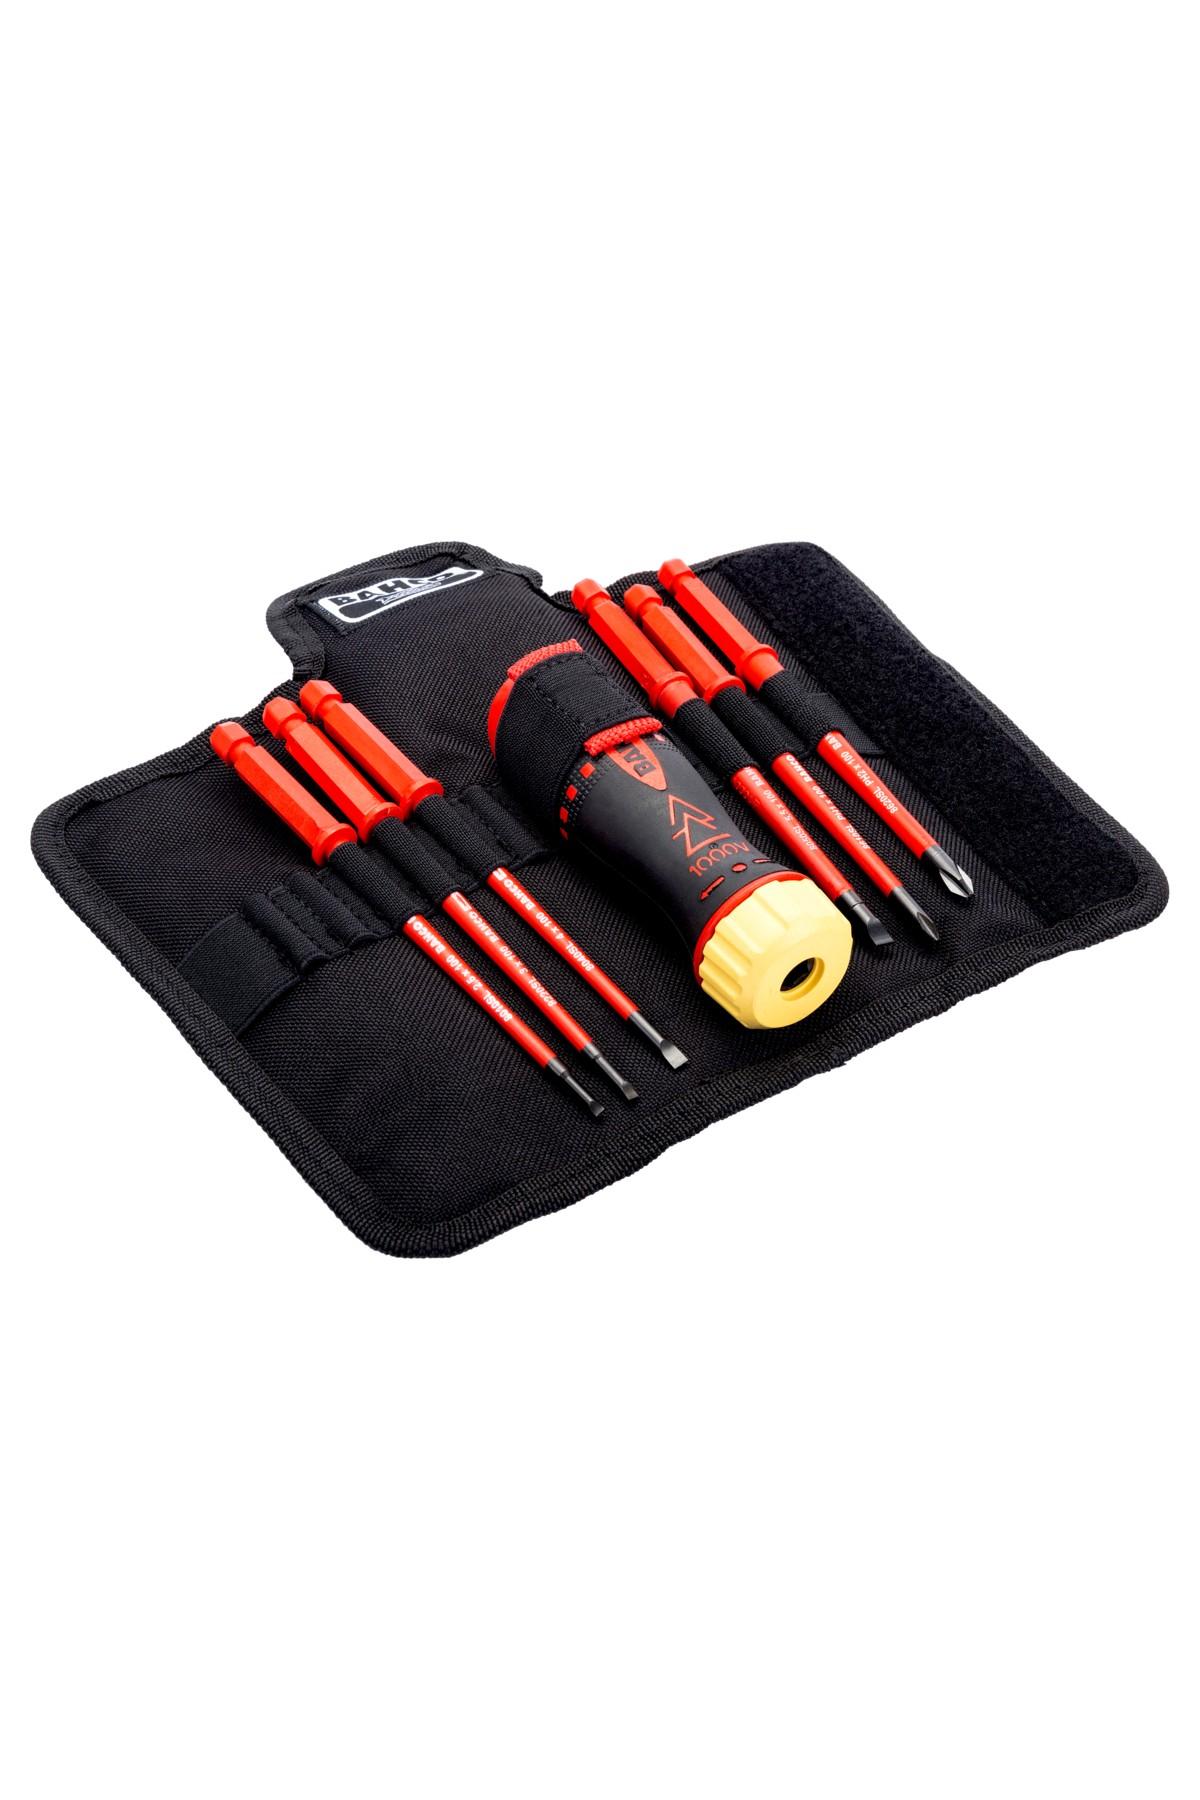 Insulated screwdriver set with straight slot and Phillips, replaceable blades in set - 6 pcs